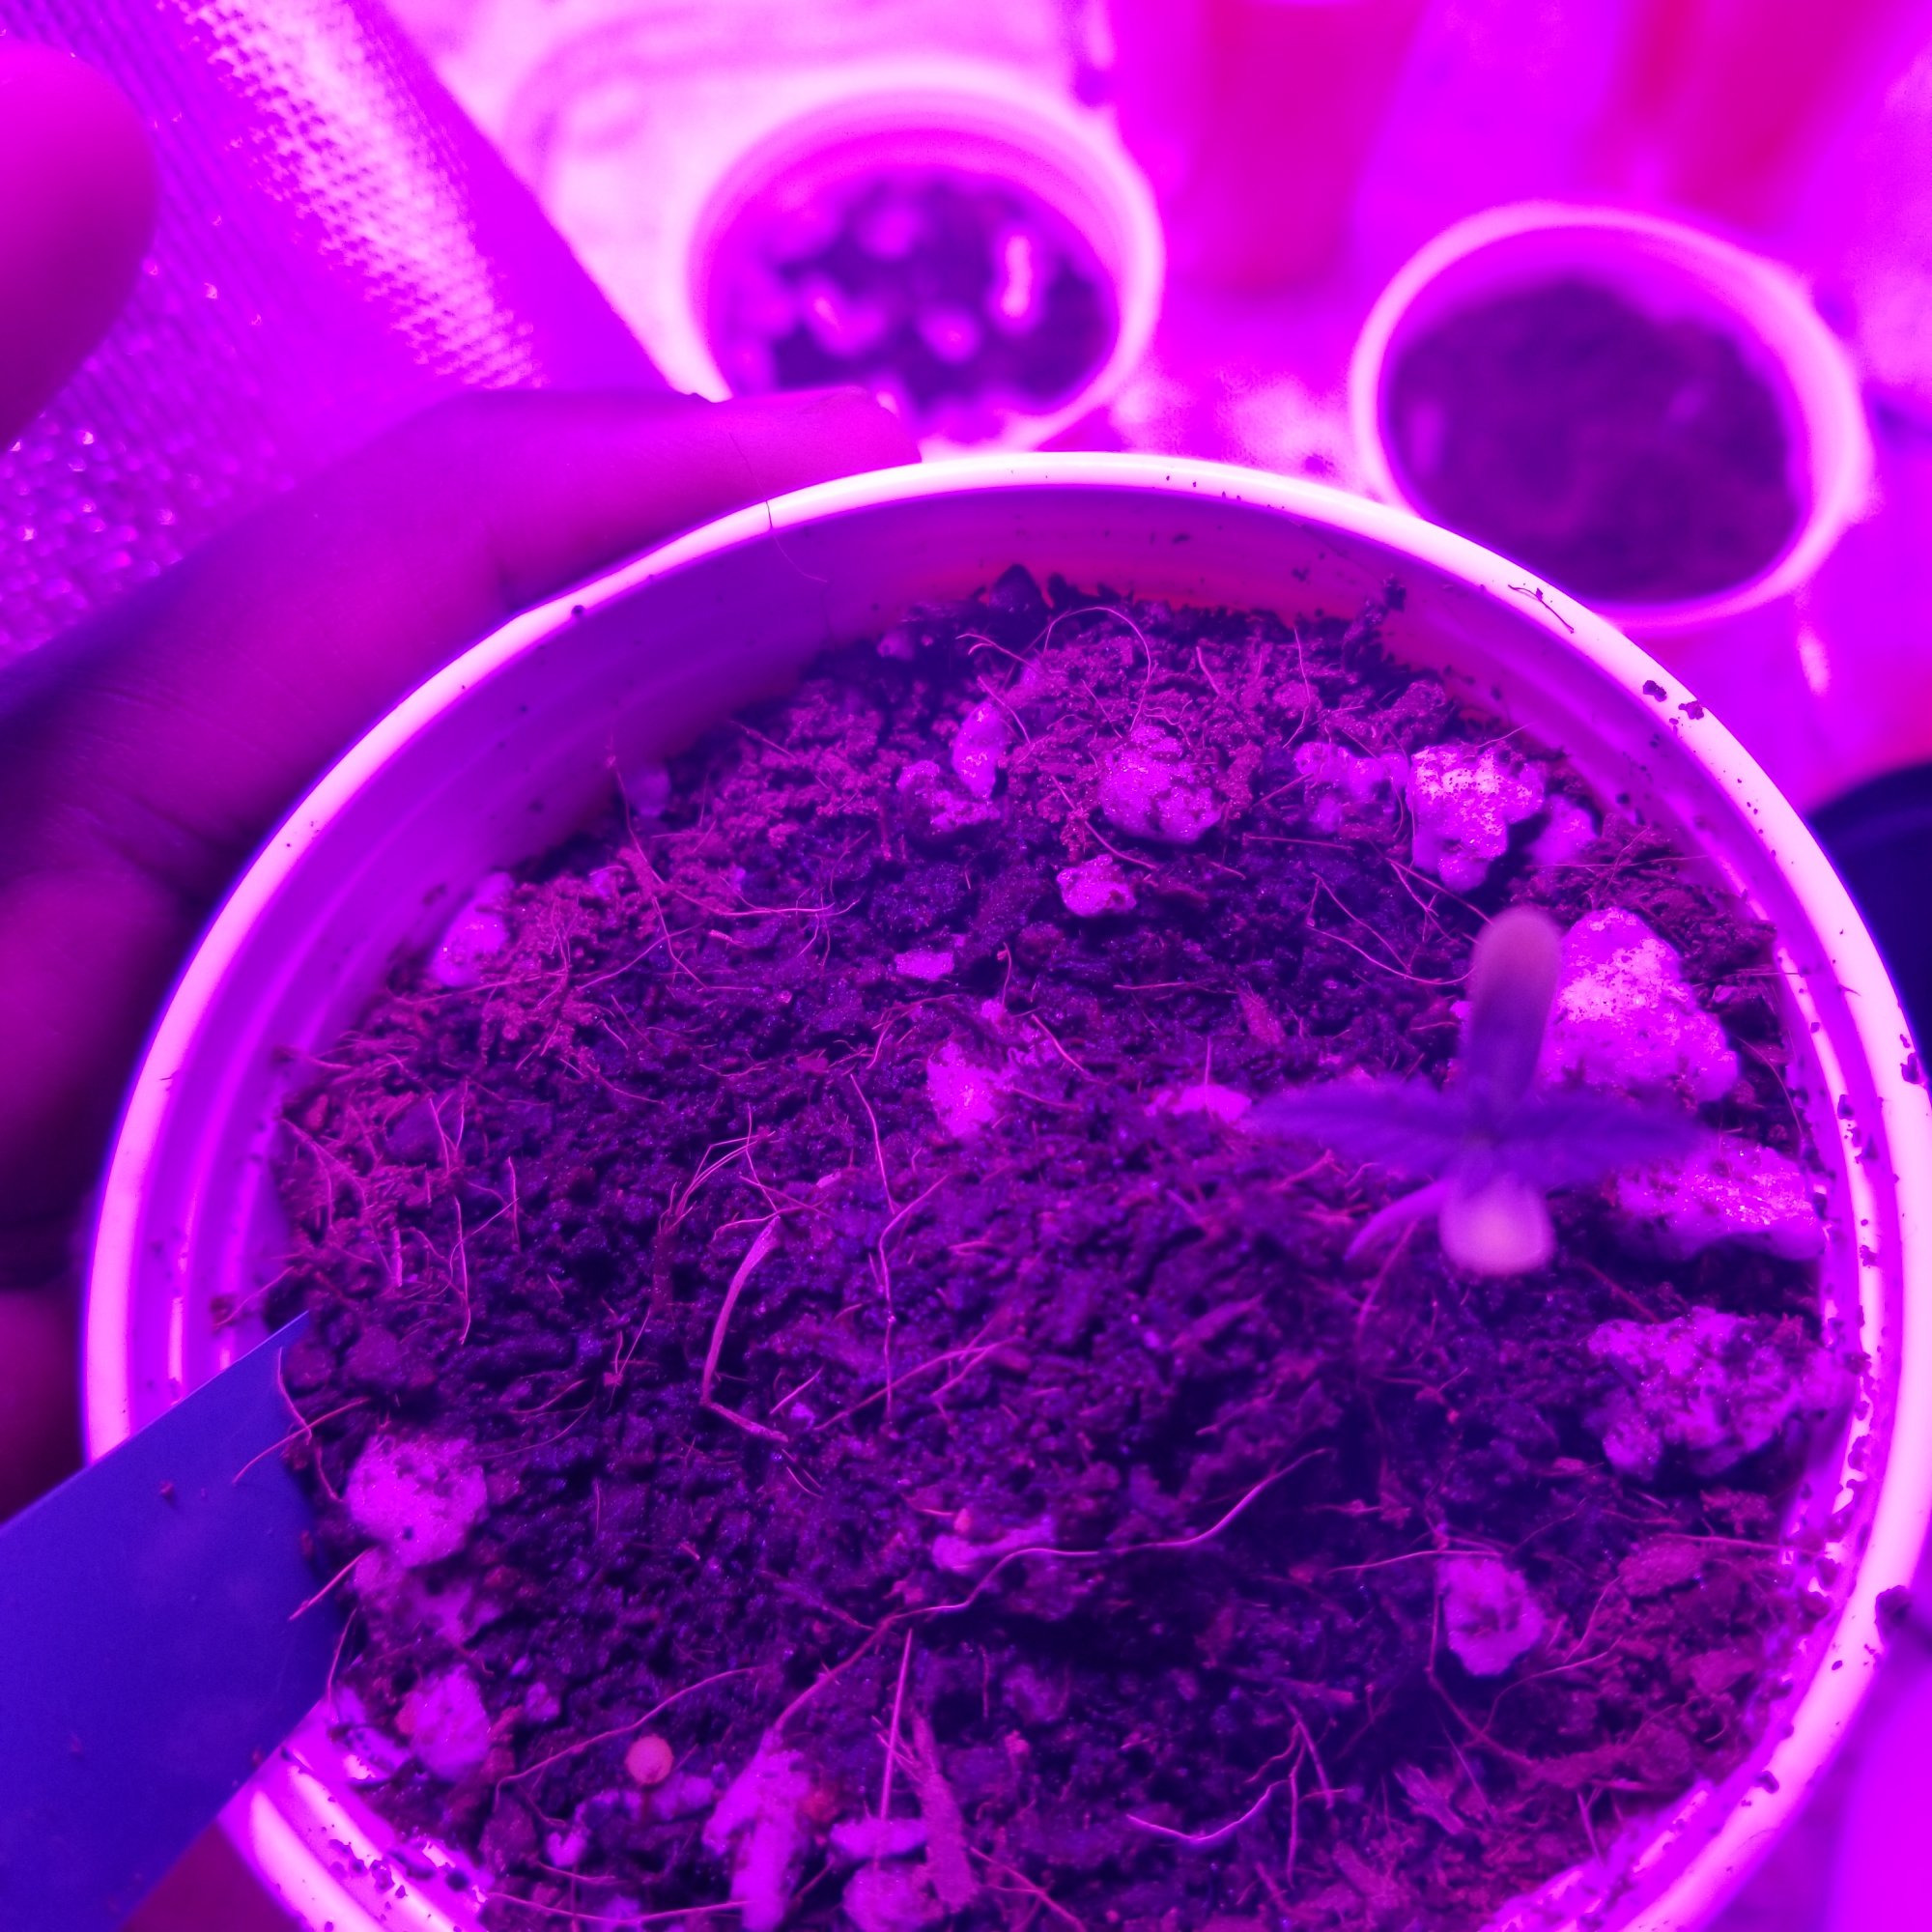 Please help my seedlings are dying 7